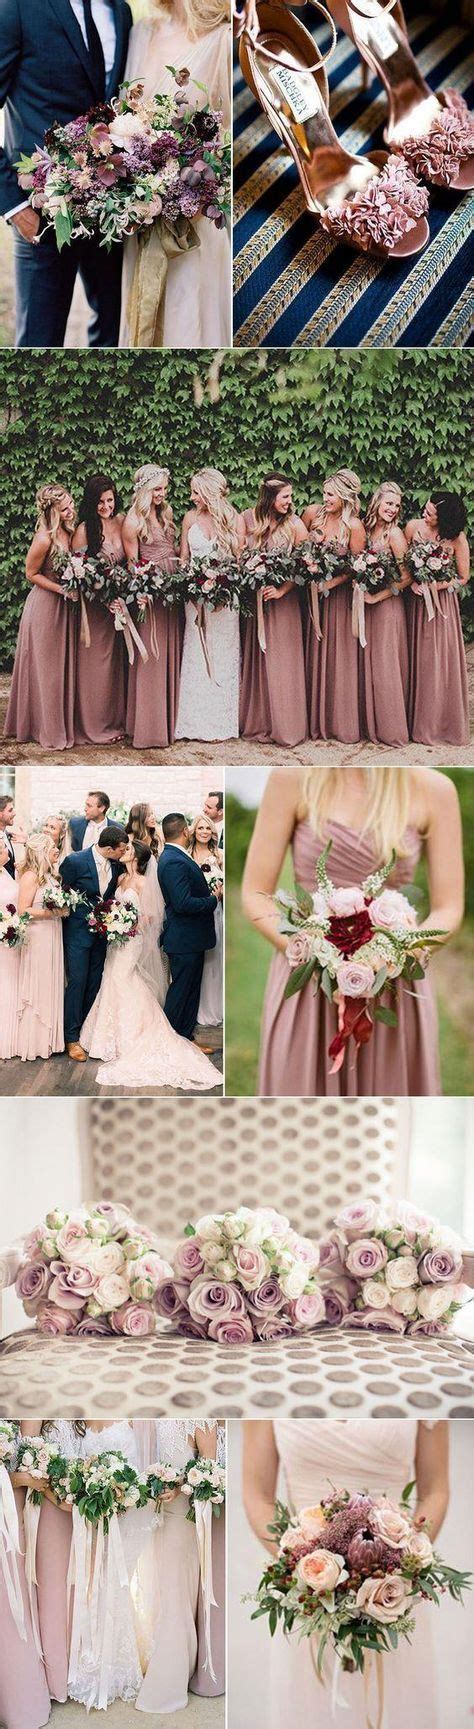 84 Best Fall Wedding Colors Images On Pinterest Invitations Wedding